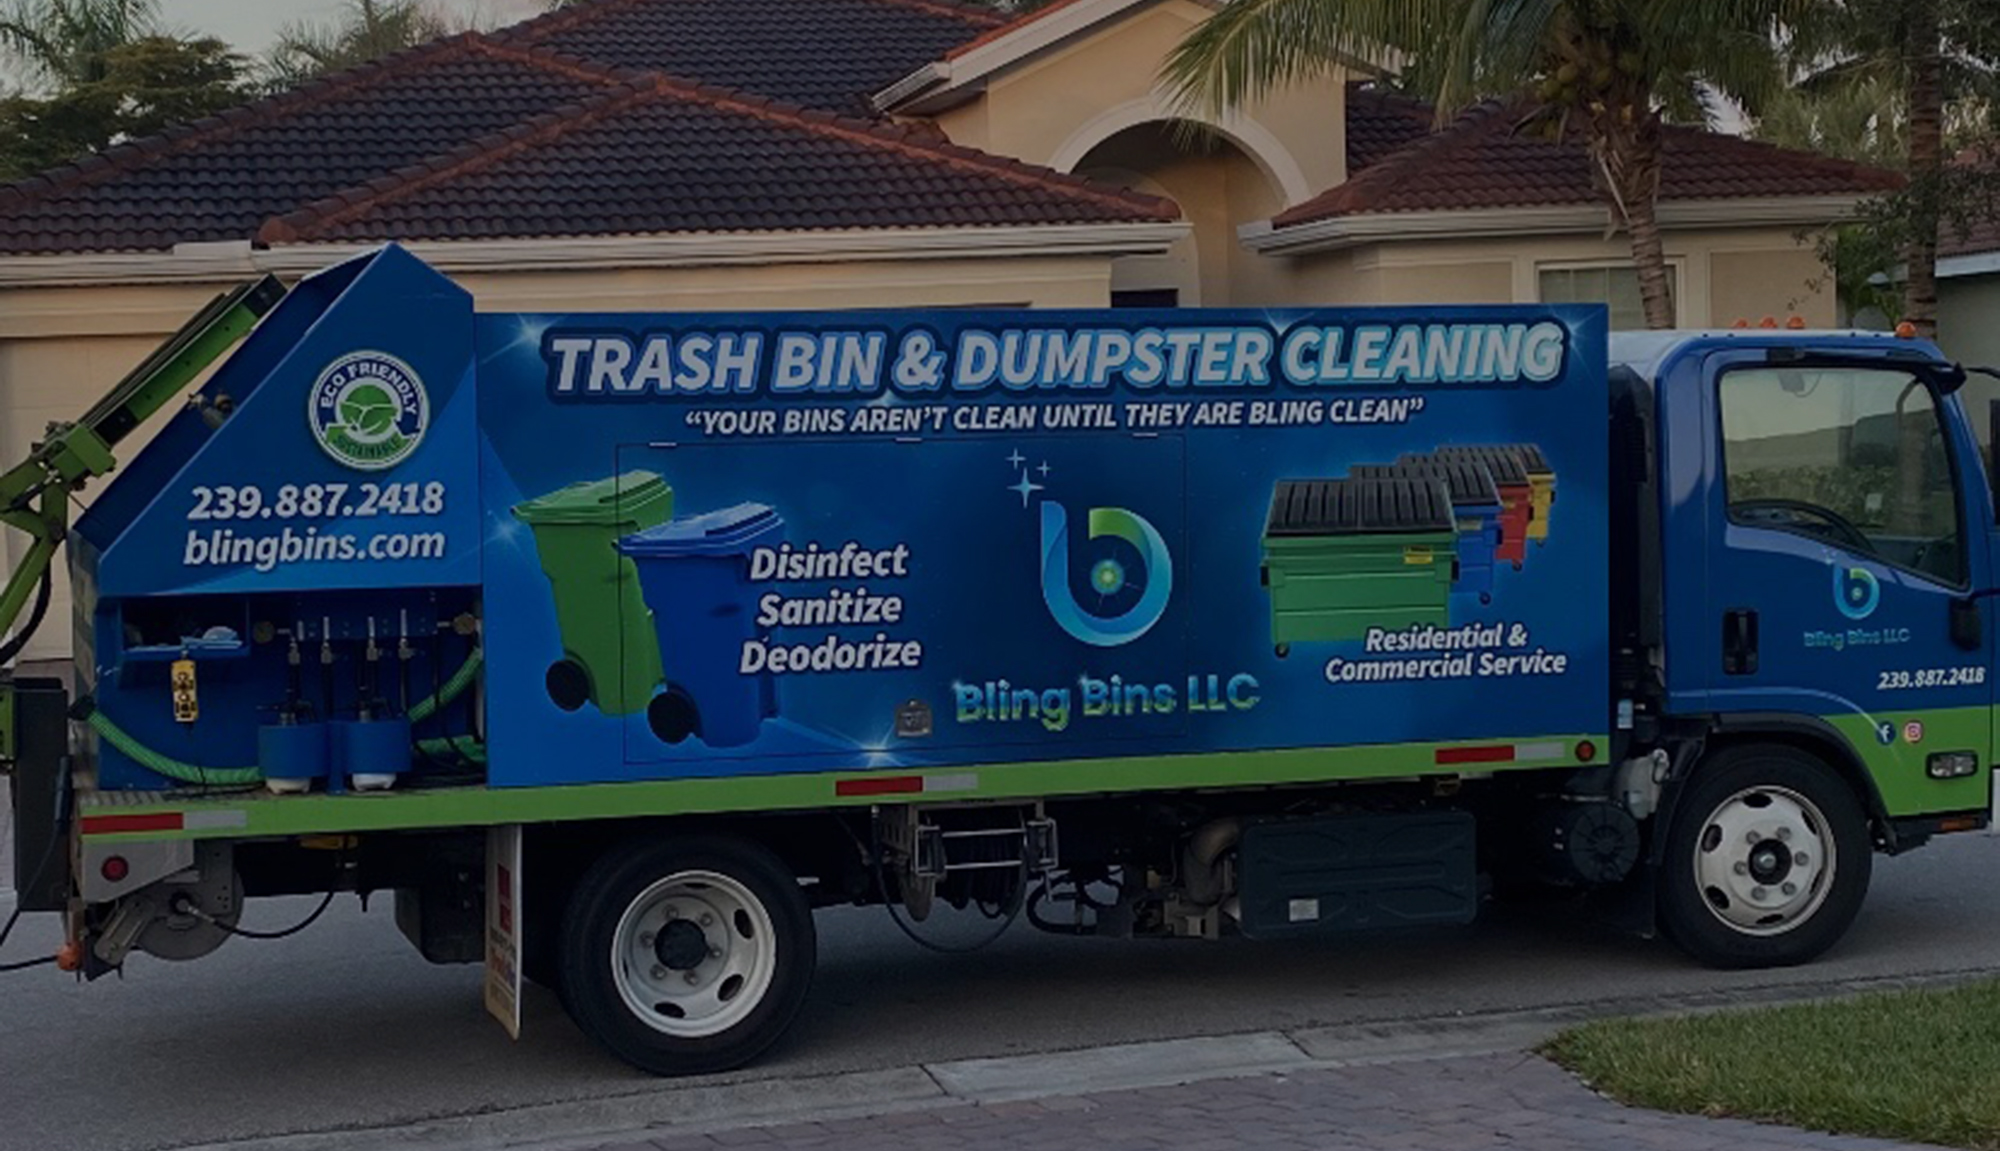 images/TRASH_BIN_AND_DUMPSTER_CLEANING_SERVICES2.jpg